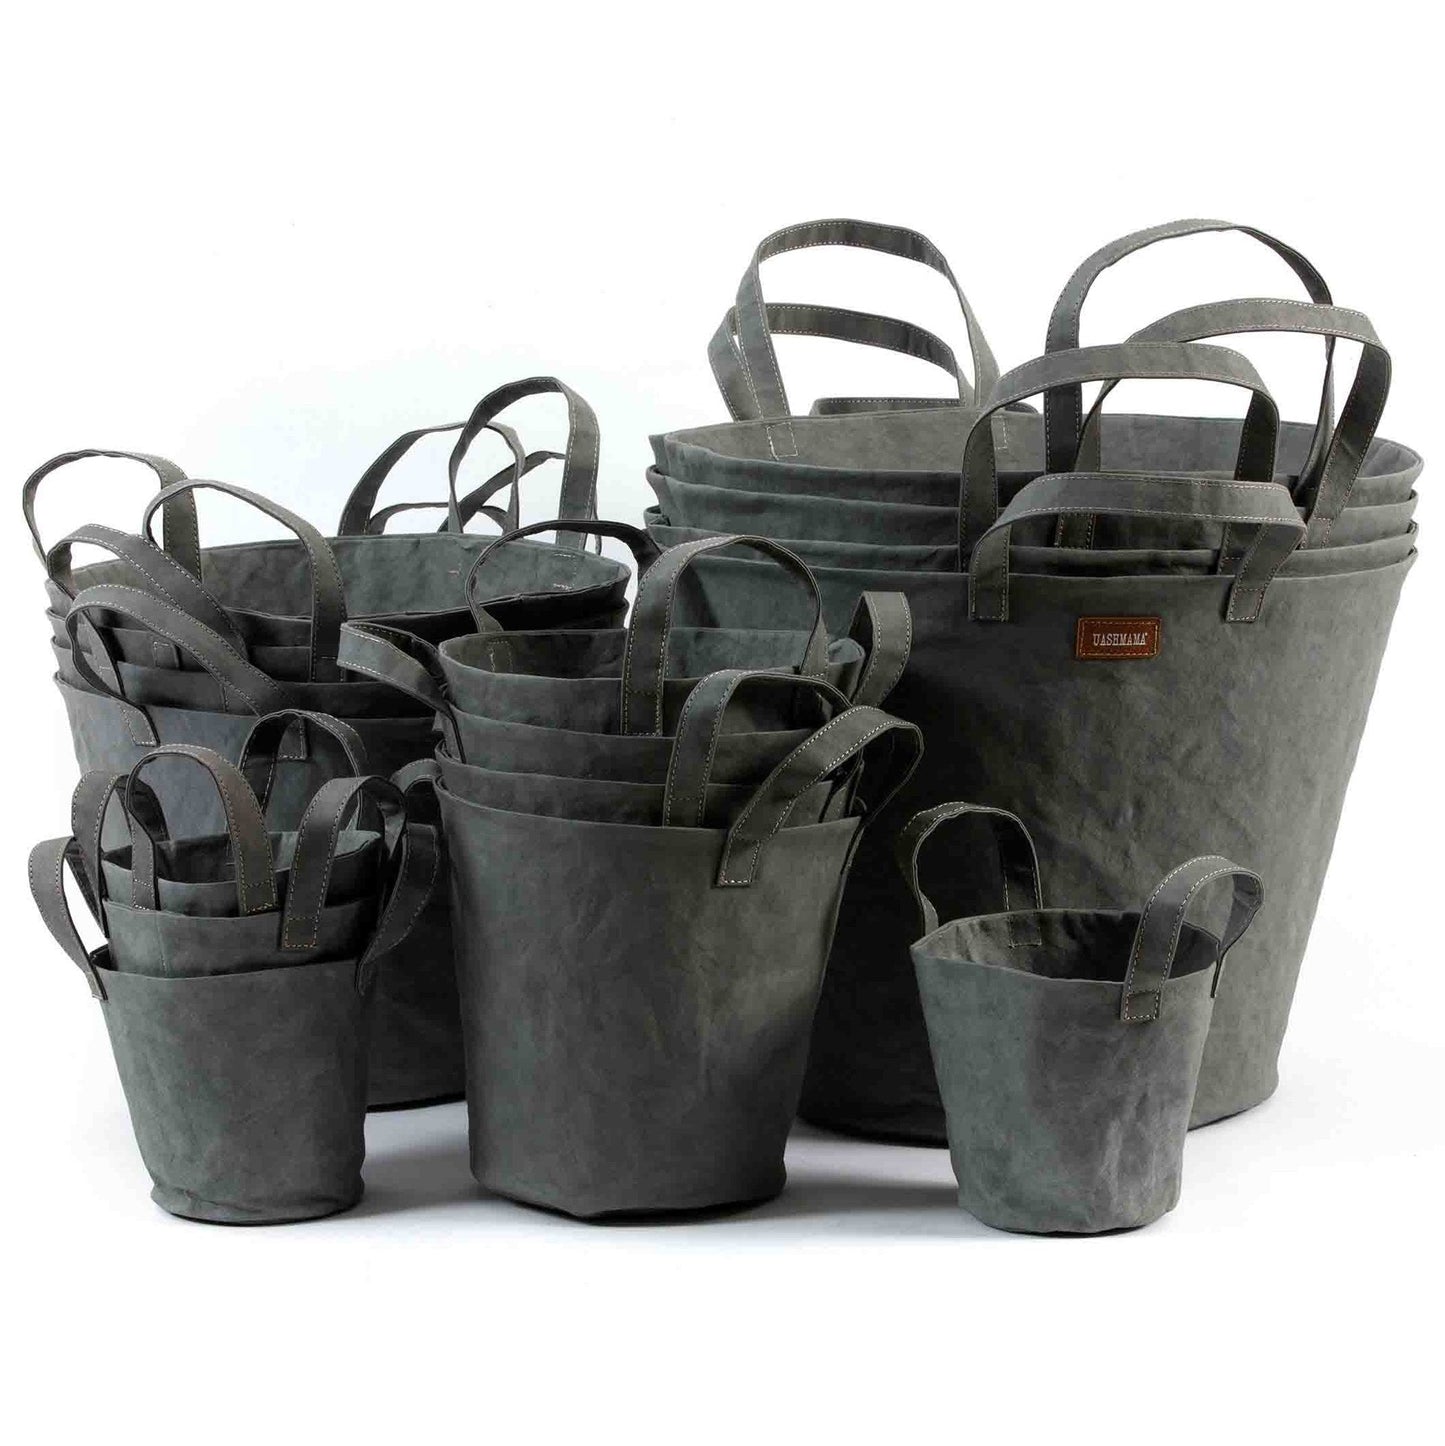 A selection of washable paper baskets are shown stacked in one another, in four varying sizes. They are shown in a dark grey colour.